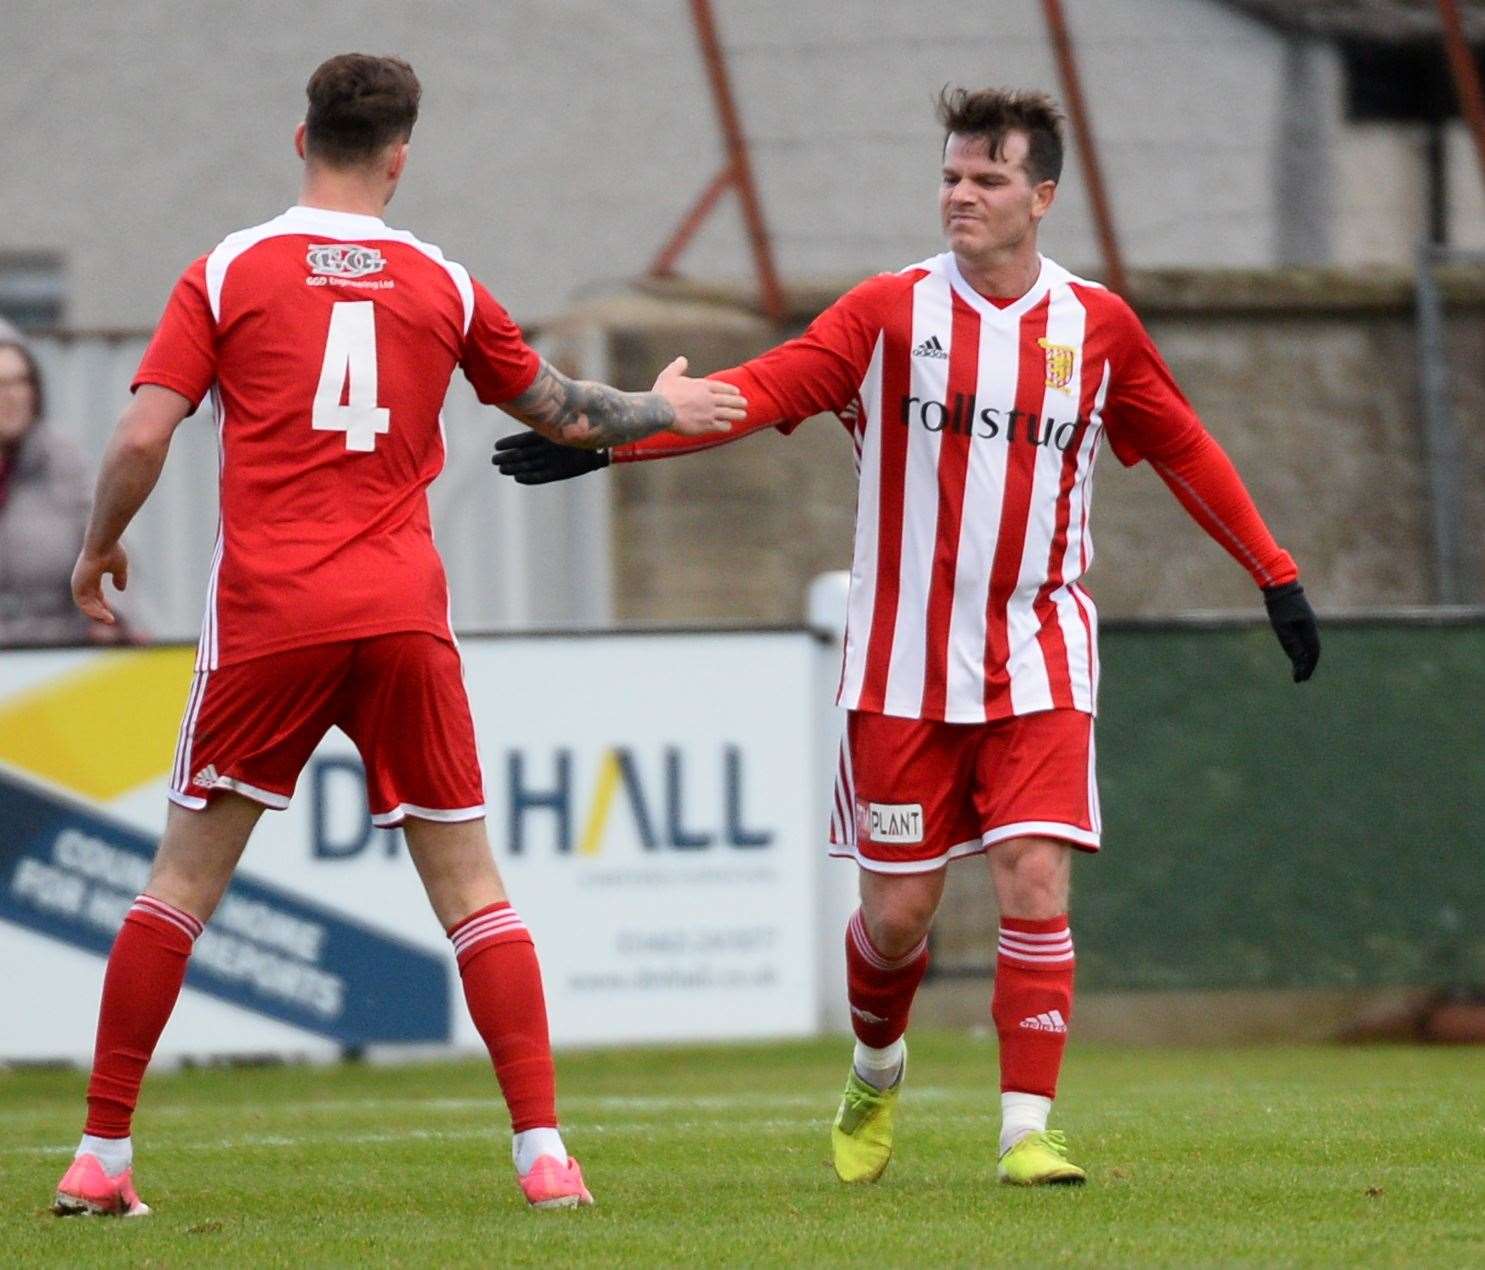 Conor Gethins, celebrating a goal against Nairn last season, has been scoring in Formartine's pre-season friendlies. Picture: Gary Anthony